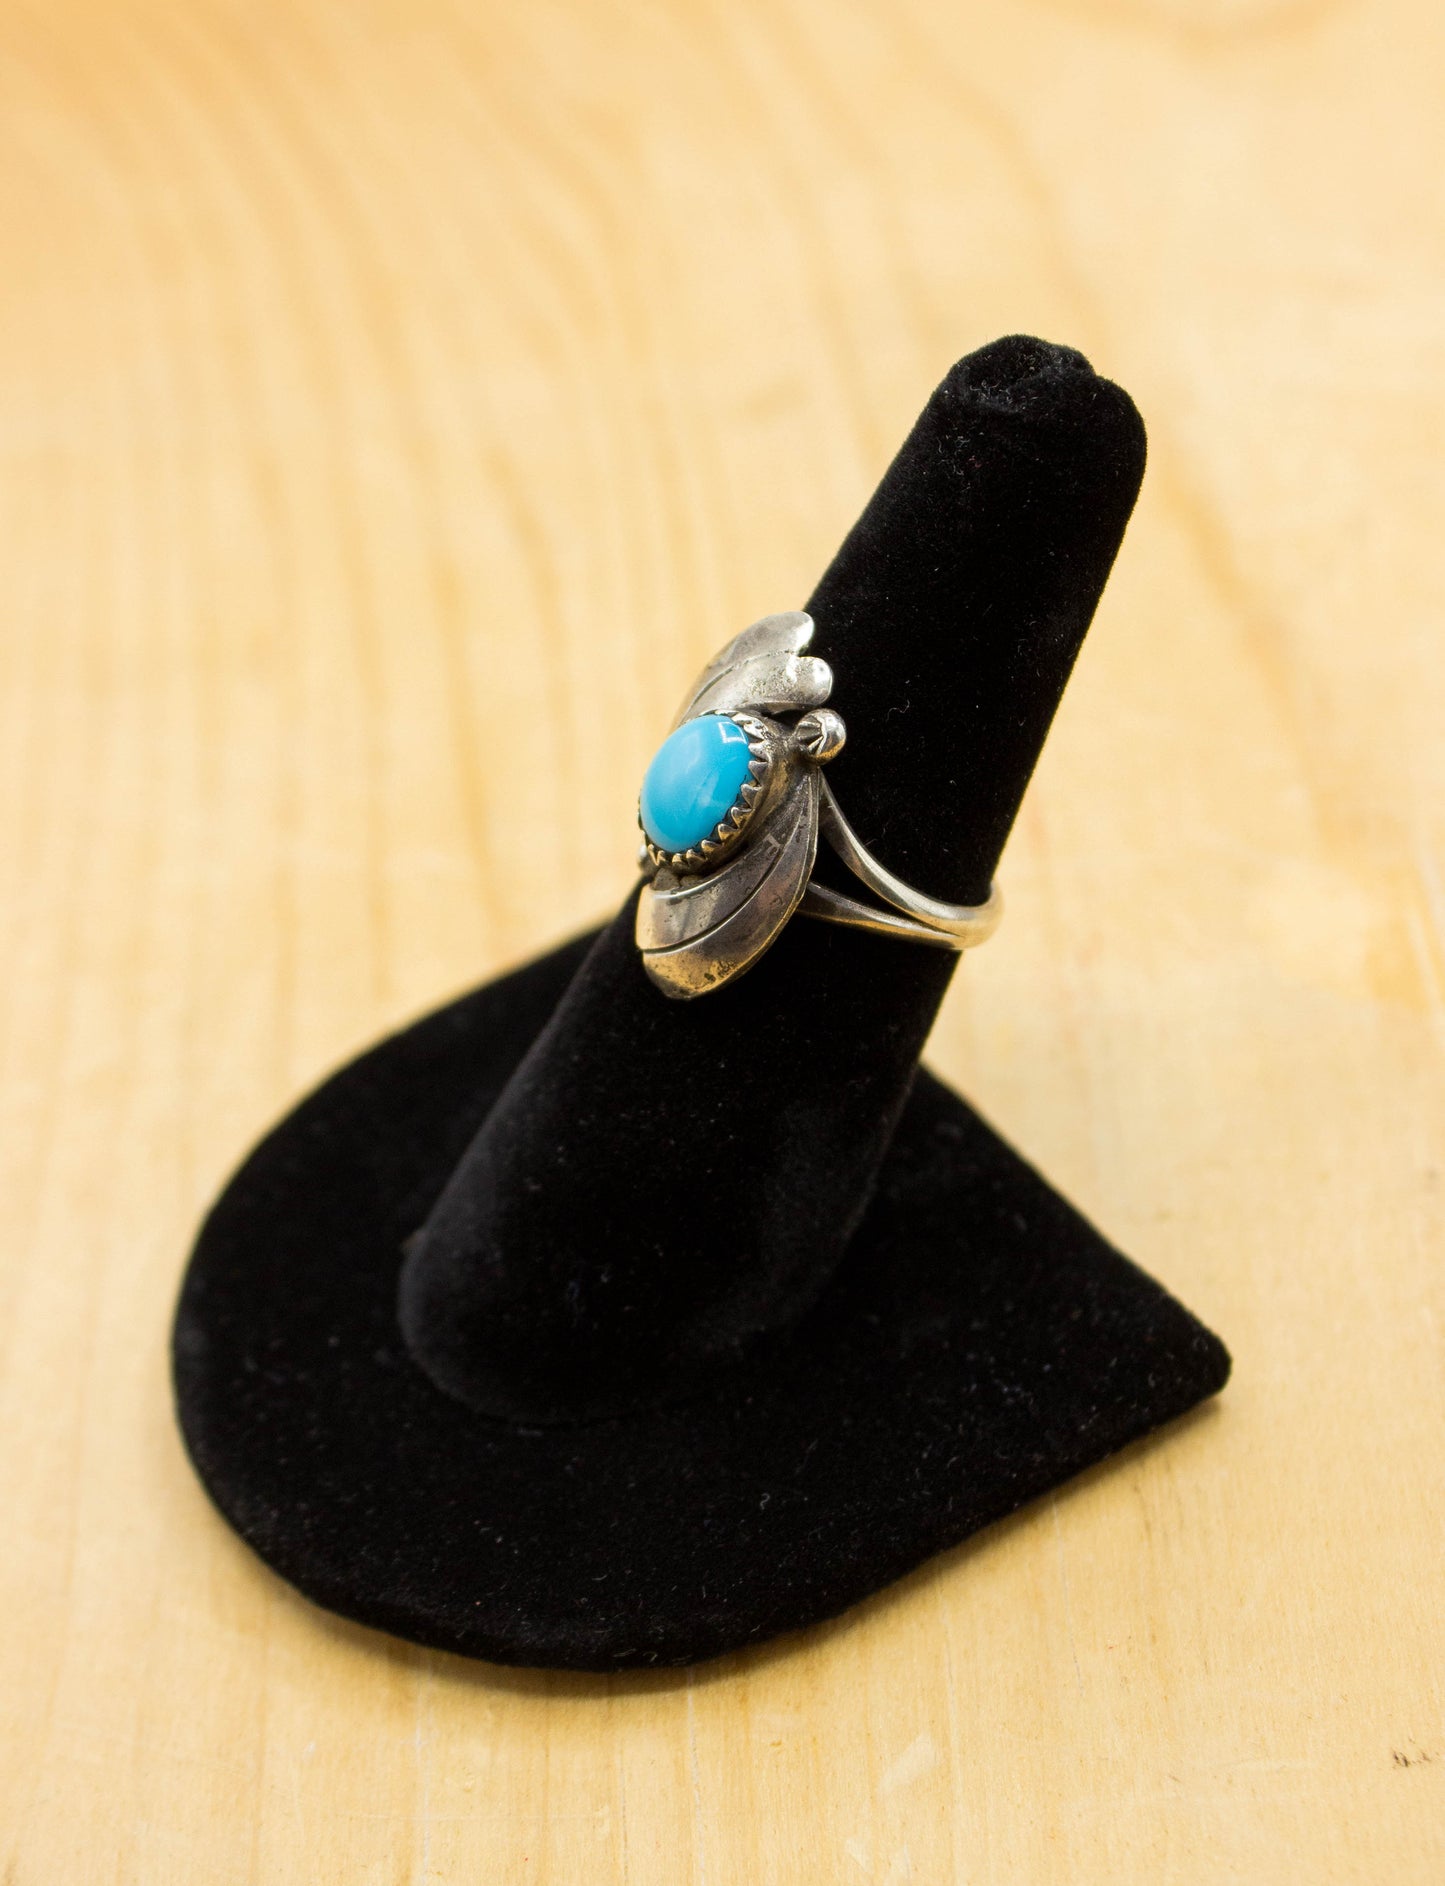 Vintage Sterling Silver and Turquoise Feather Ring Size 6 3/4